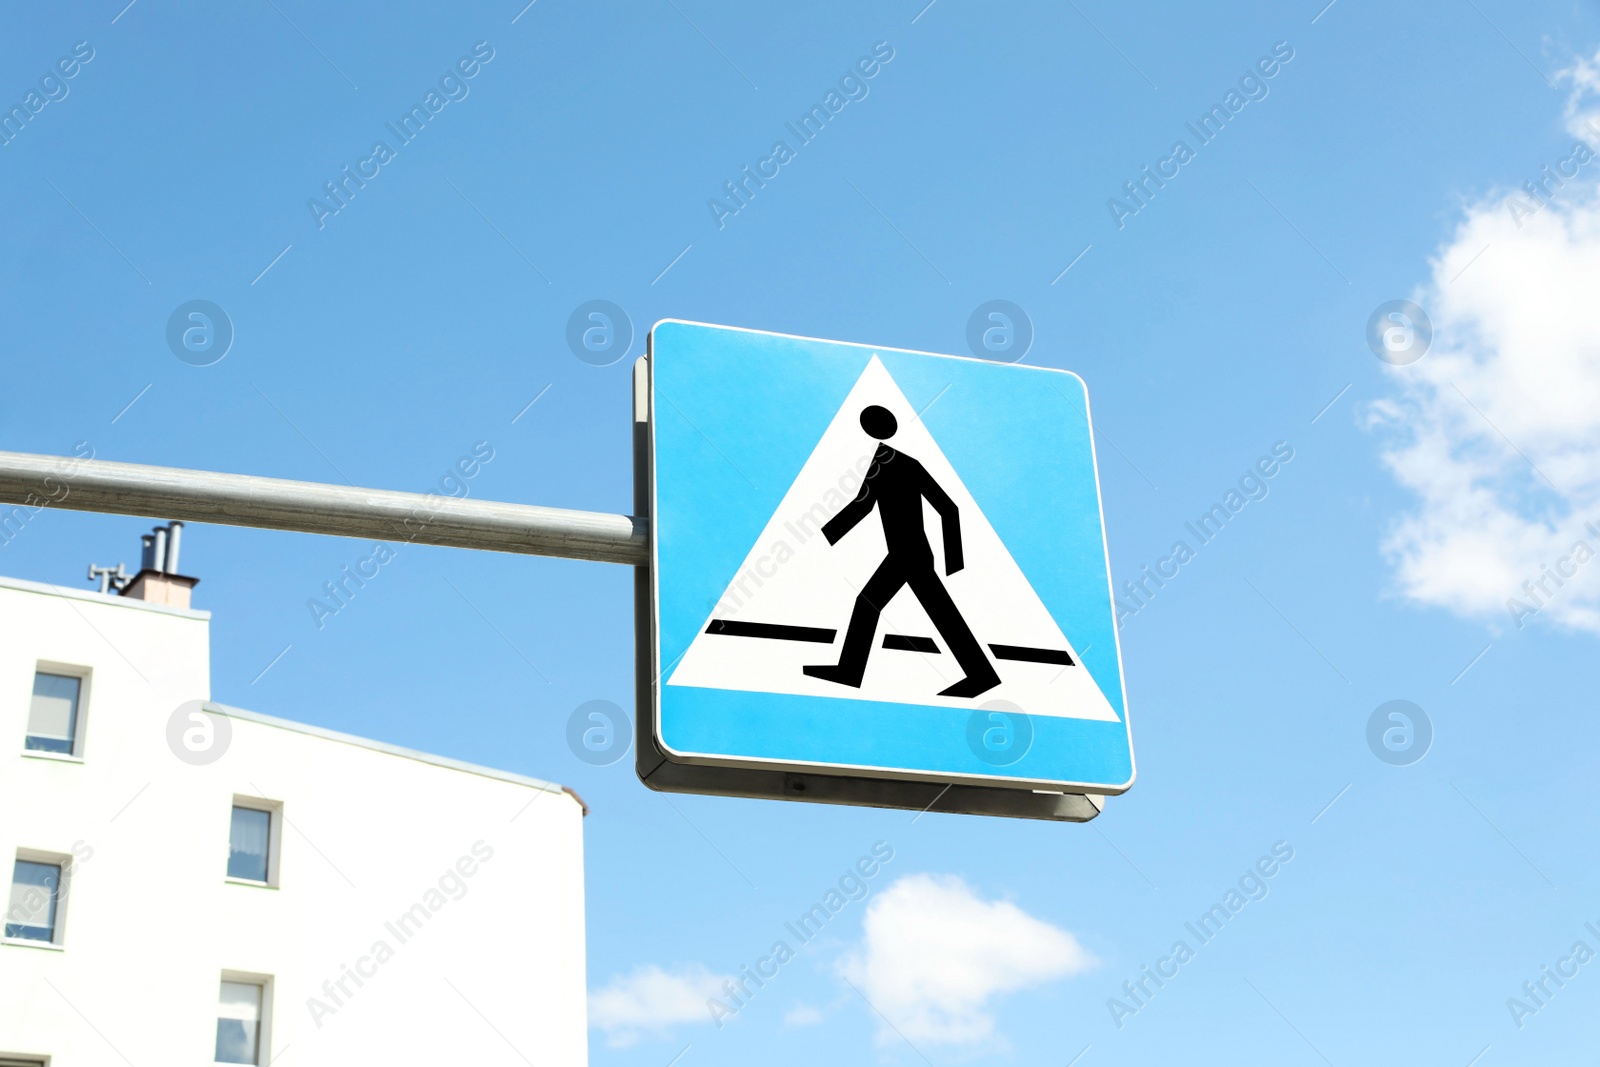 Photo of Traffic sign Pedestrian Crossing on city street, low angle view